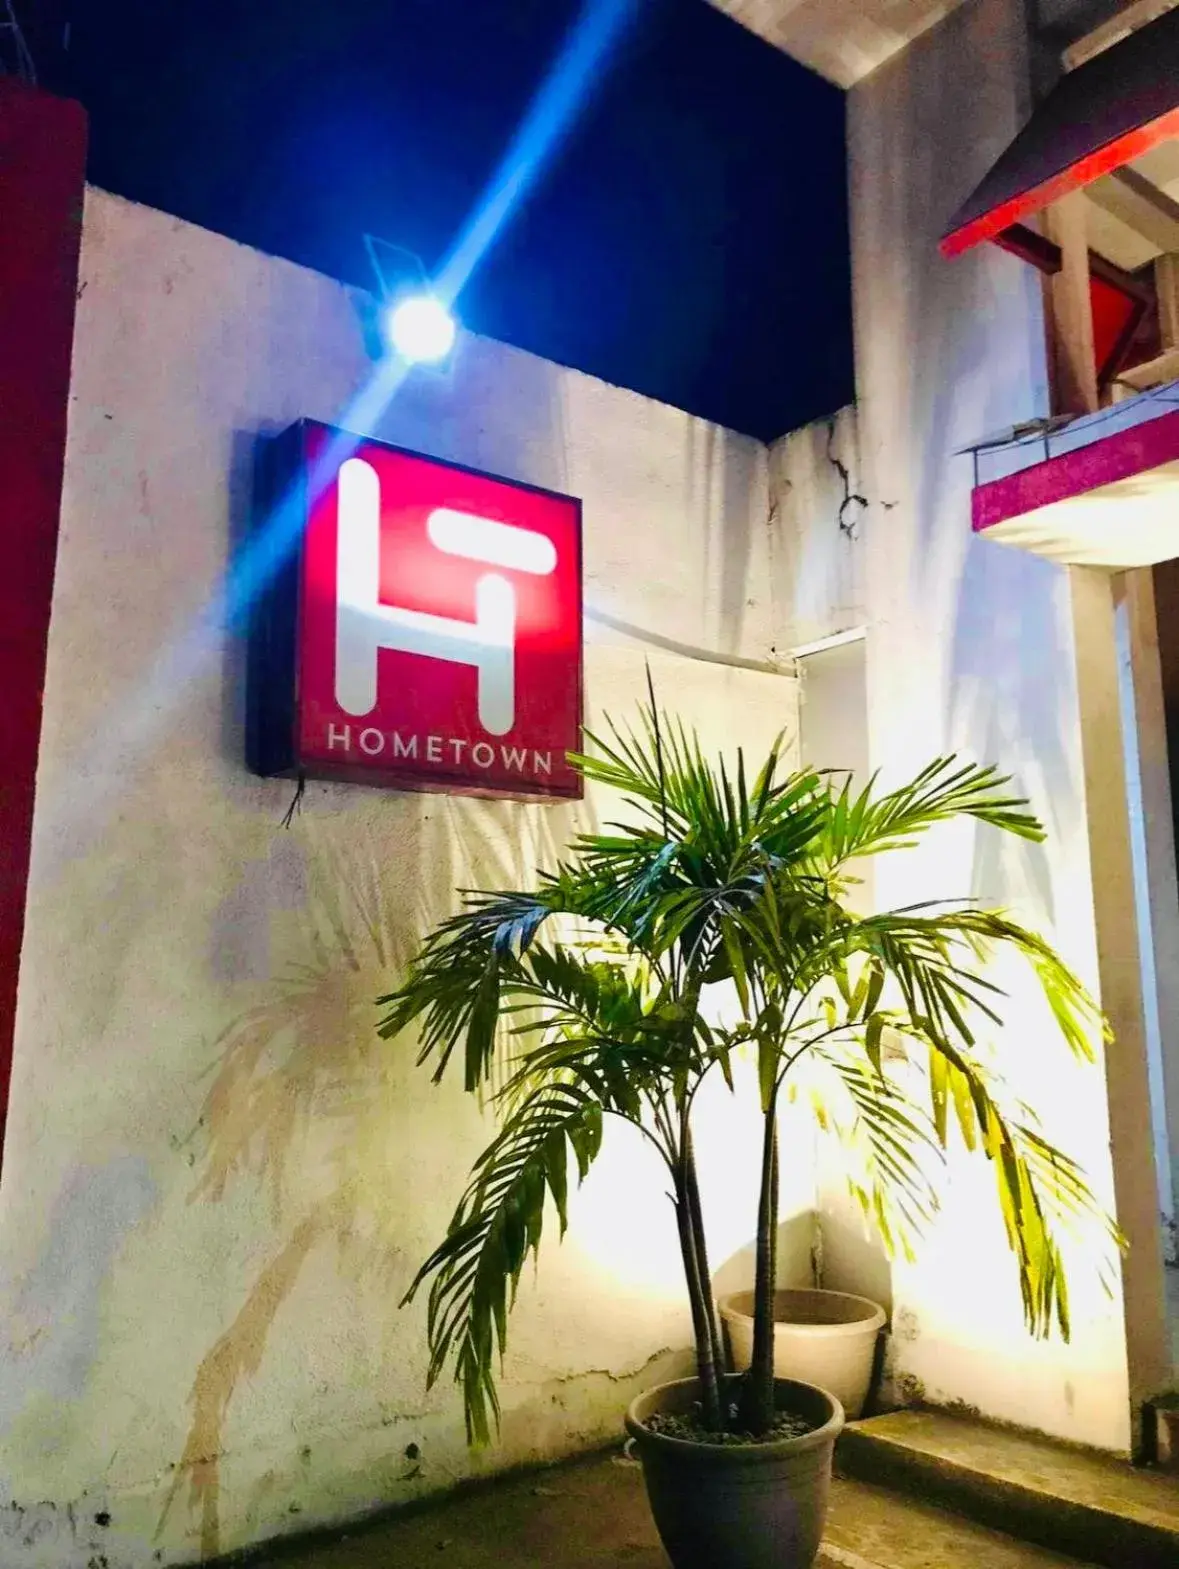 Property logo or sign in Hometown Hotel Bacolod